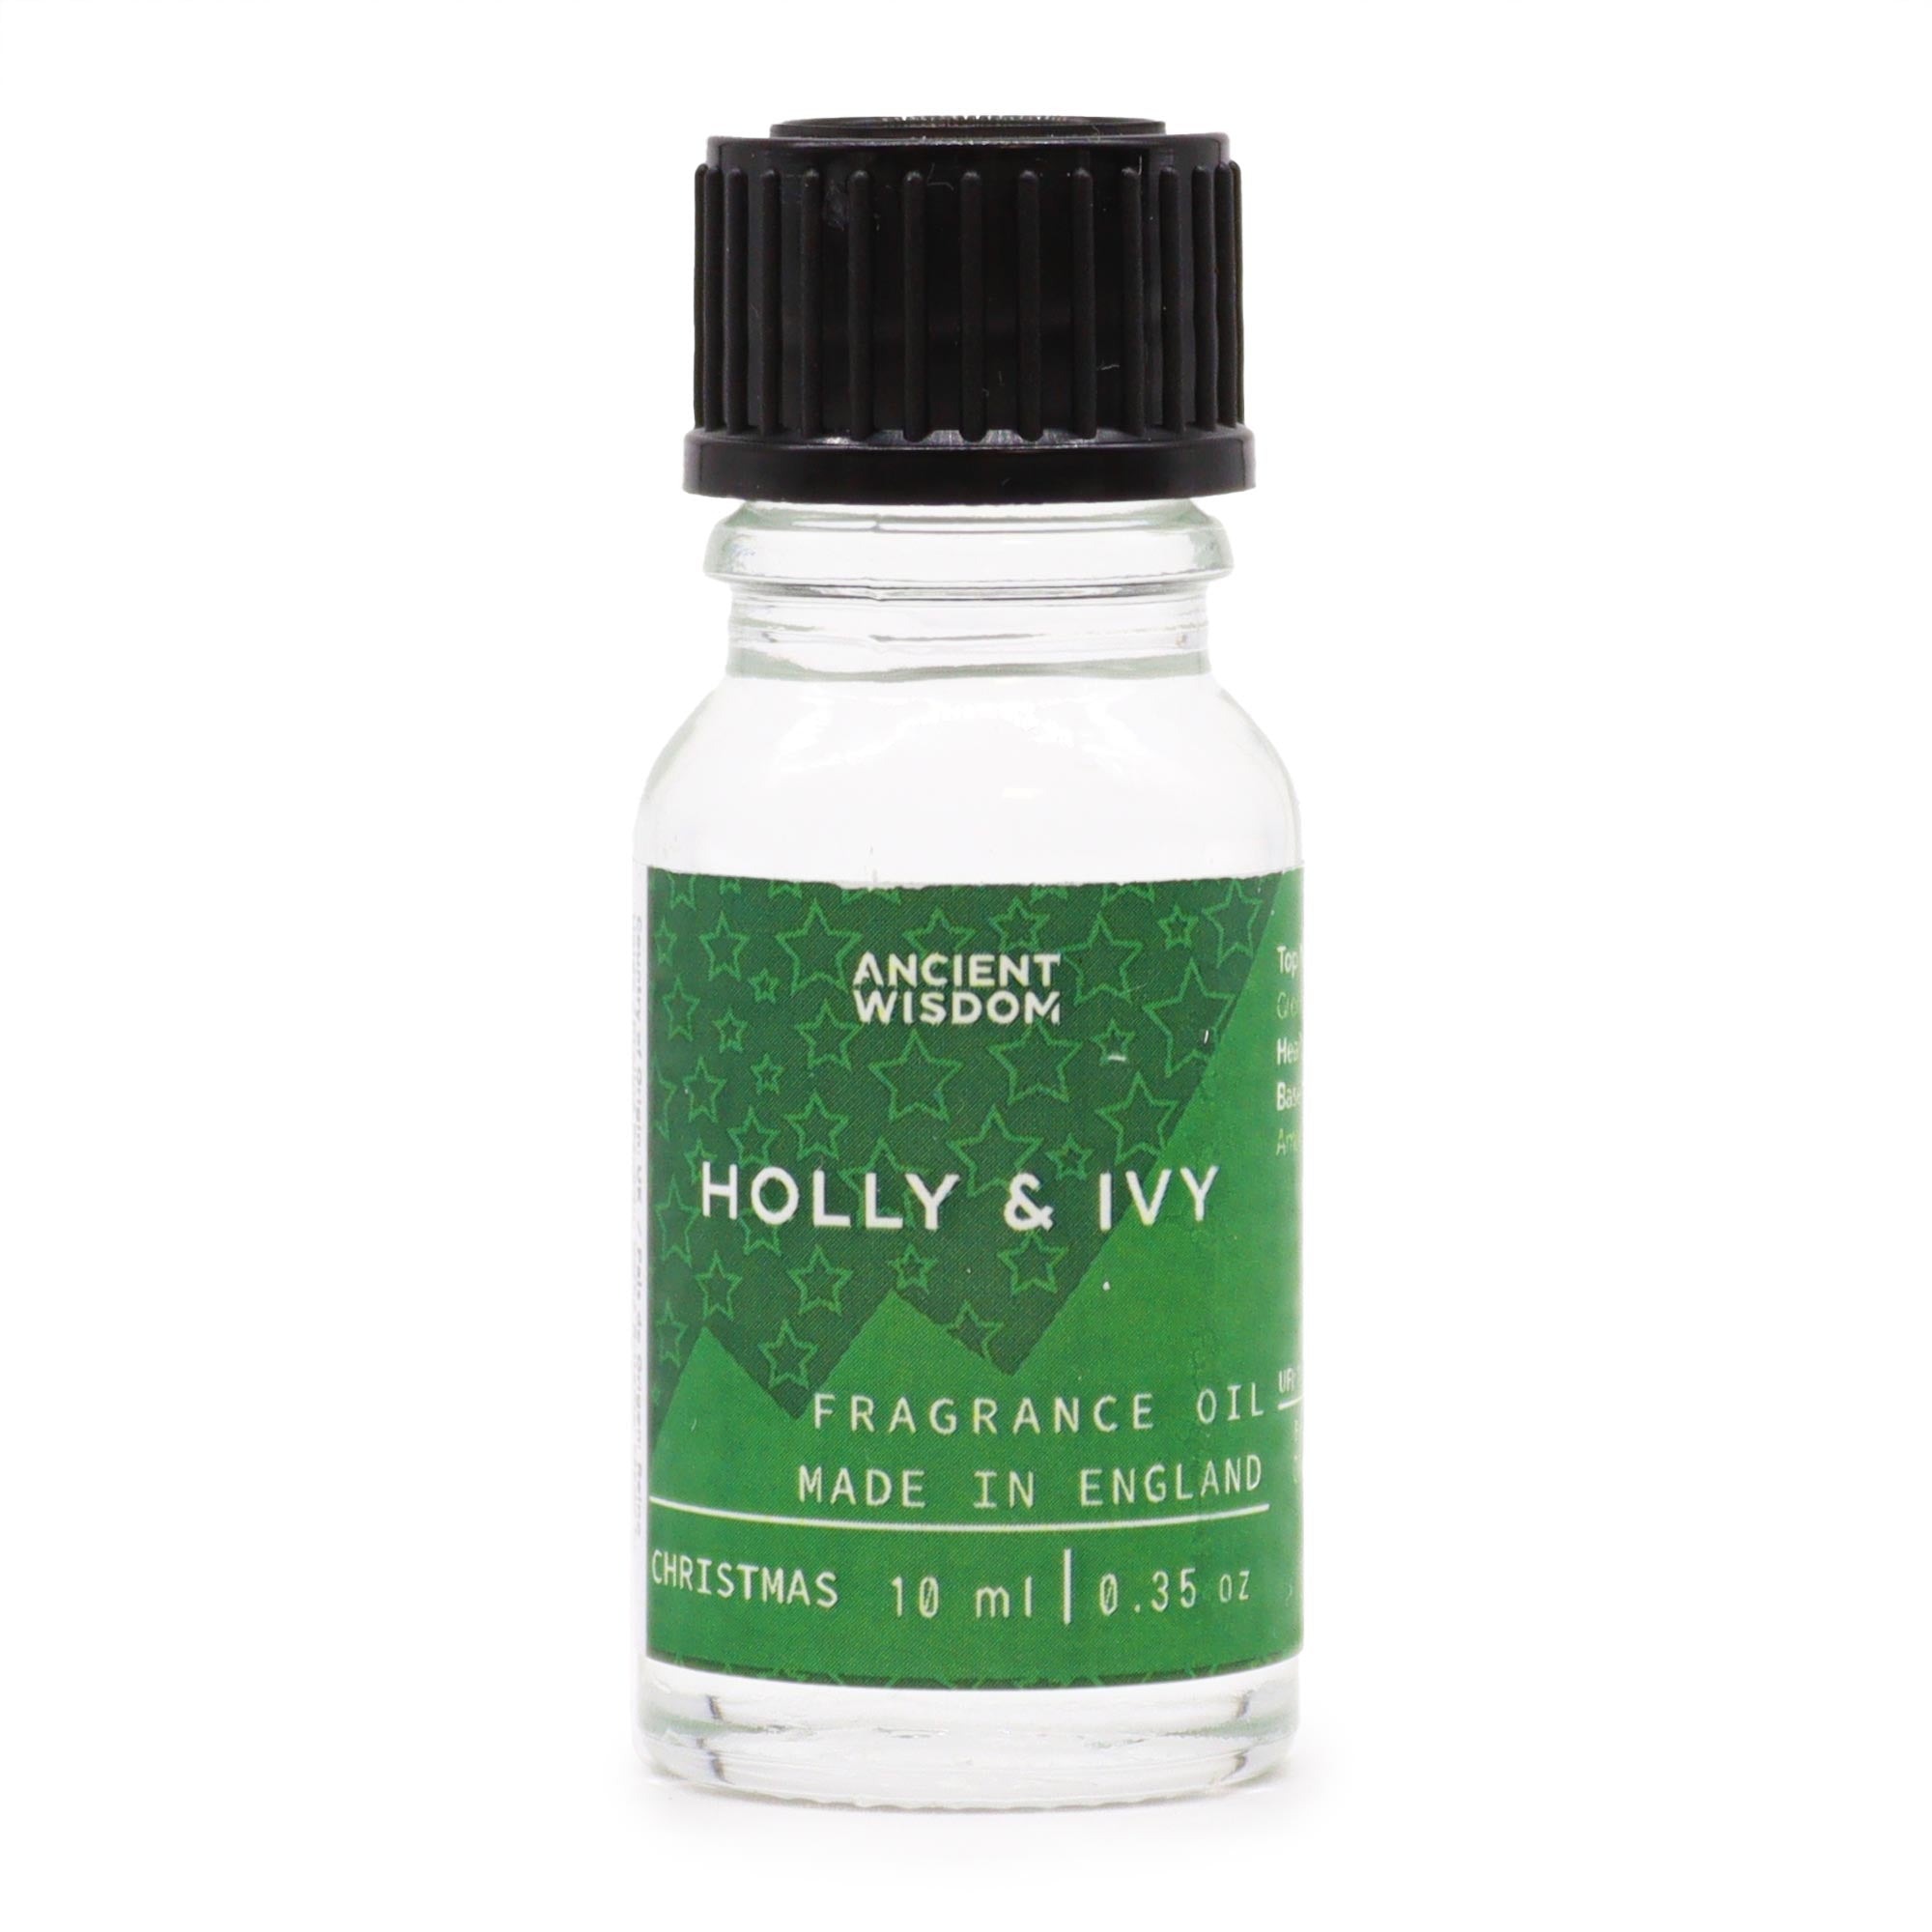 View Holly Ivy Fragrance Oil 10ml information